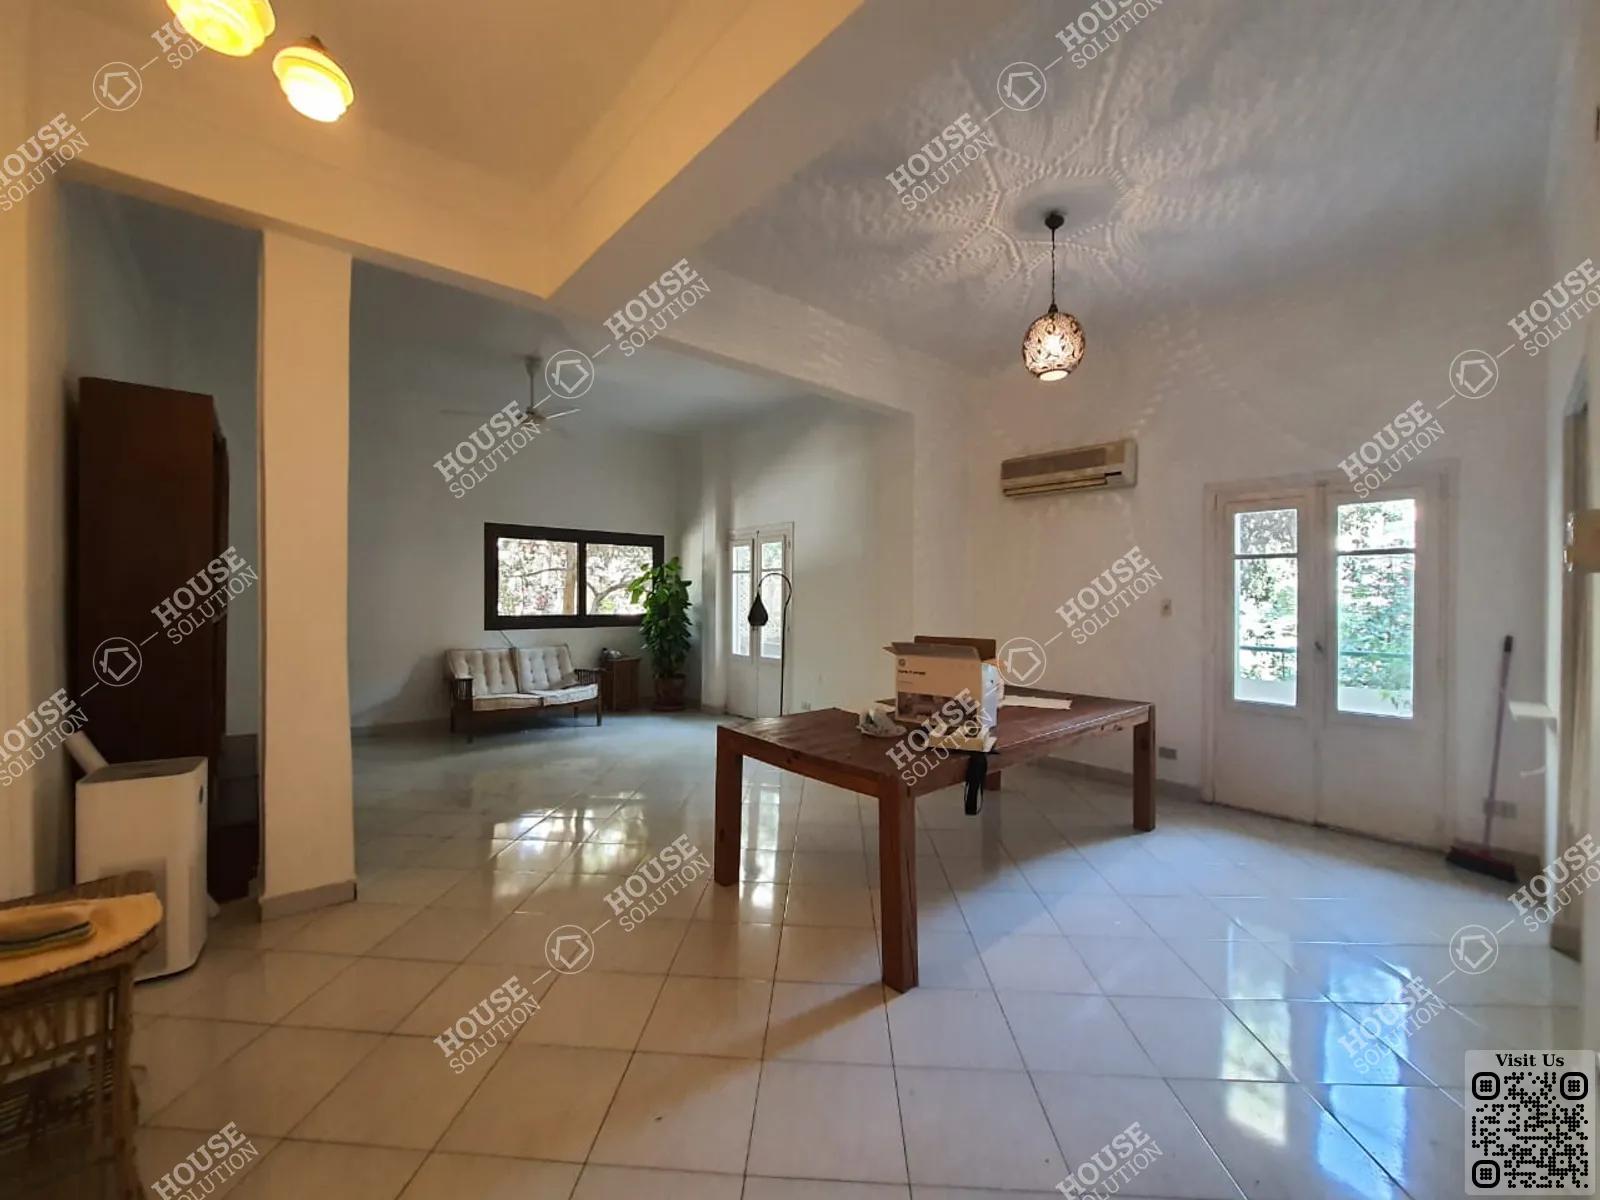 RECEPTION  @ Apartments For Rent In Maadi Maadi Sarayat Area: 200 m² consists of 3 Bedrooms 2 Bathrooms Furnished 5 stars #5362-0